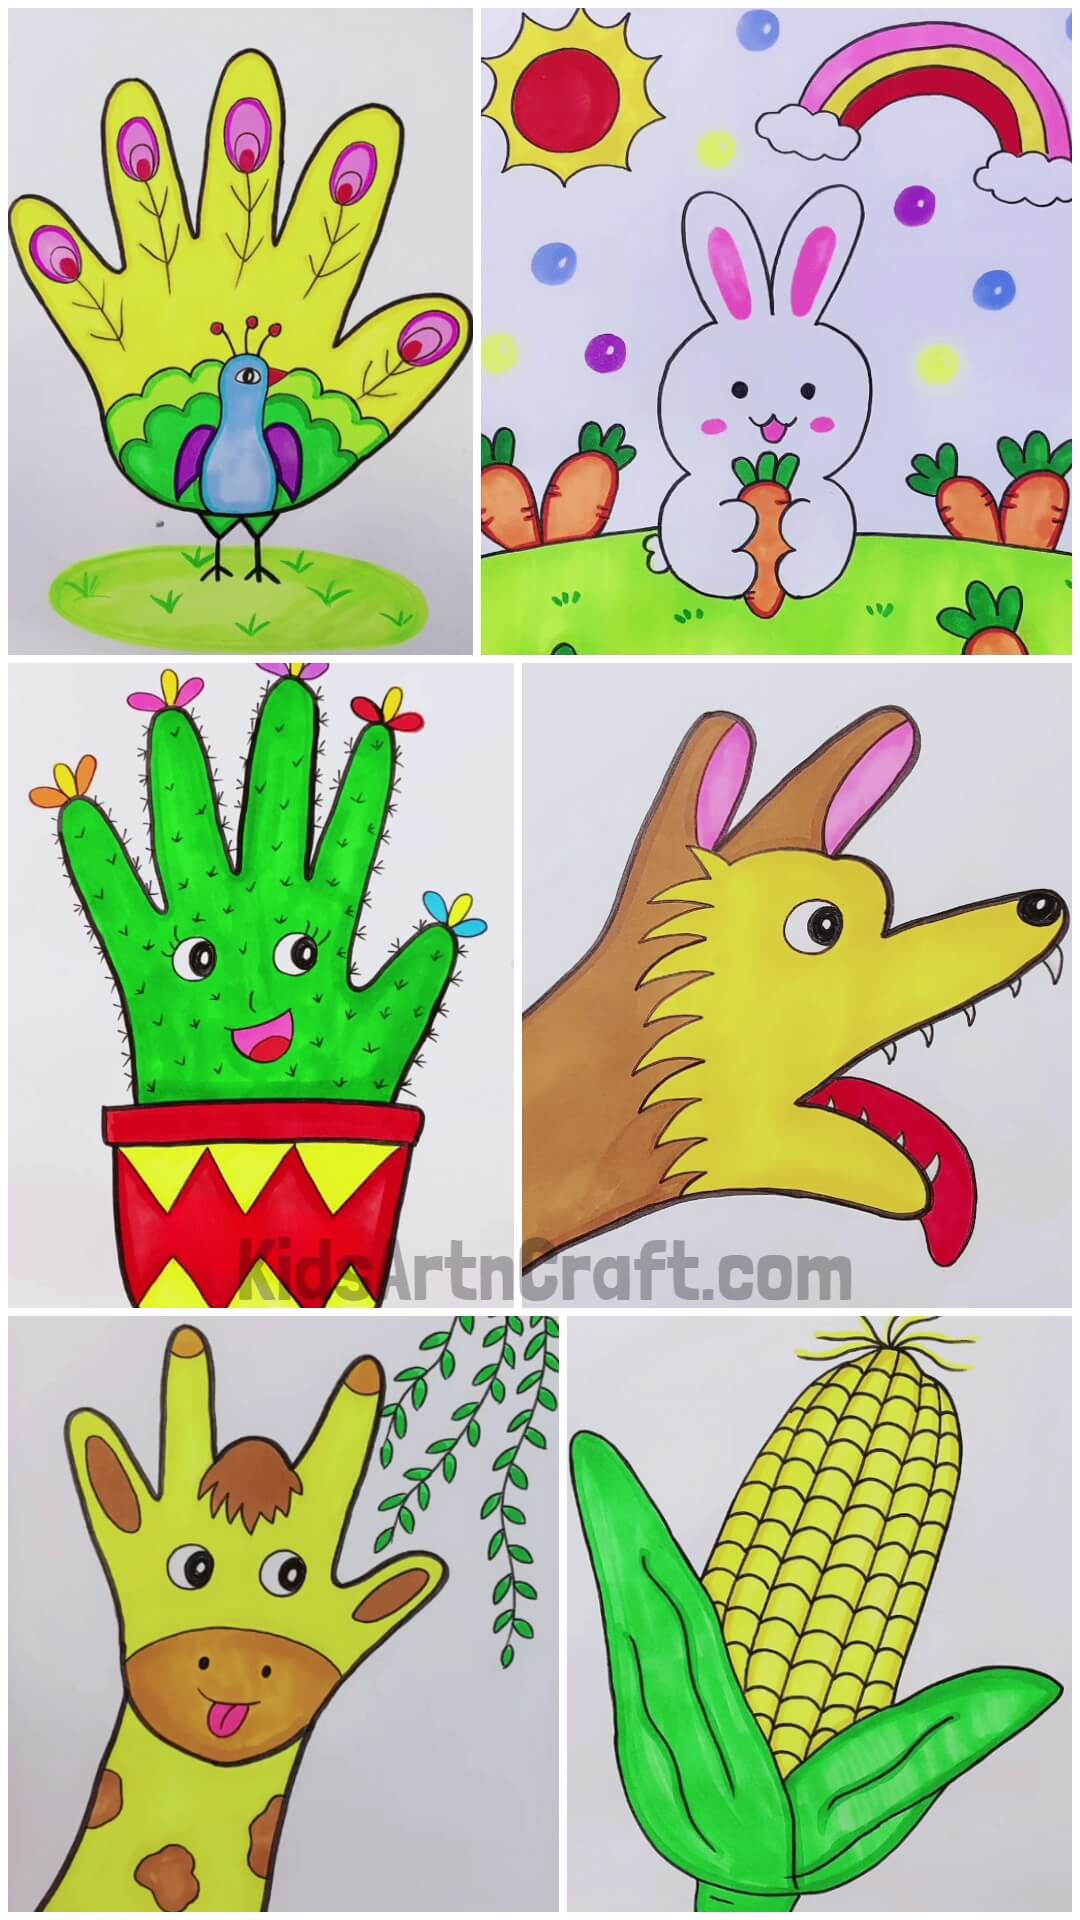 Easy Drawing Tricks And Ideas for Kids to Try